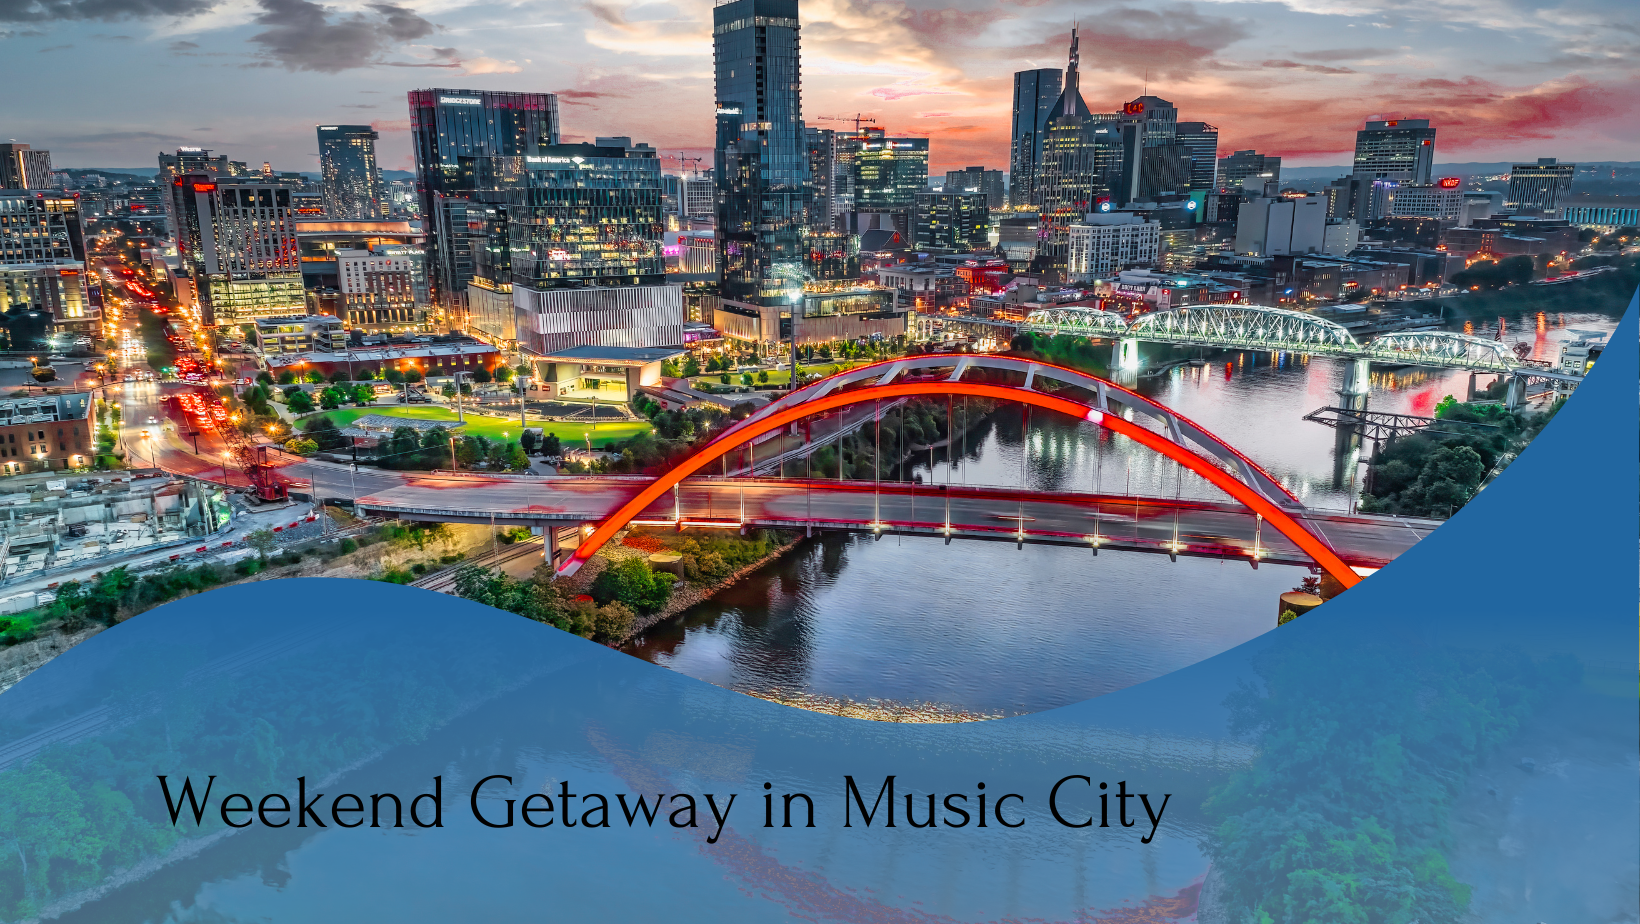 A vibrant cityscape of downtown Nashville at dusk, showcasing brightly-lit buildings and a glowing red bridge over the river. Text at the bottom reads "Weekend Getaway in Music City".